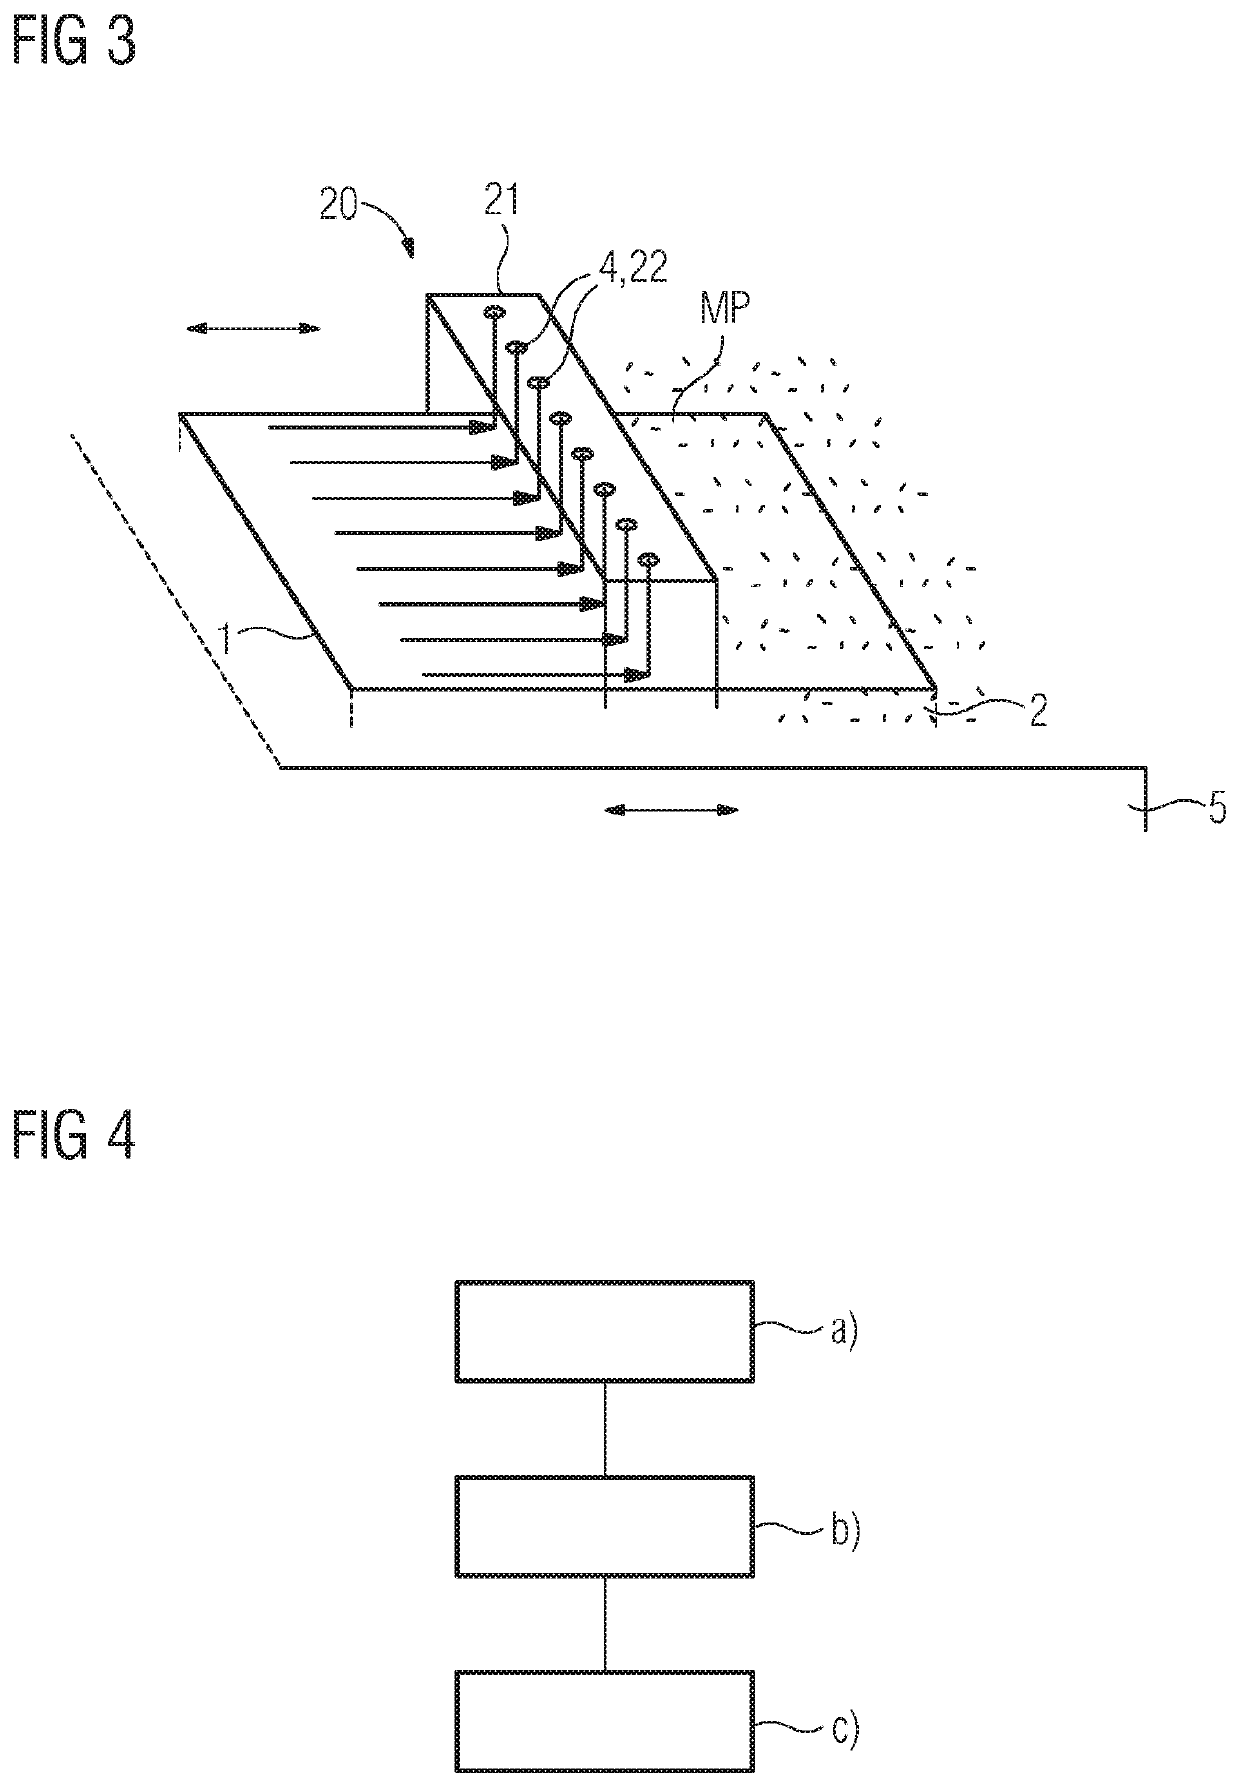 Method of additively manufacturing a structure on a pre-existing component out of the powder bed